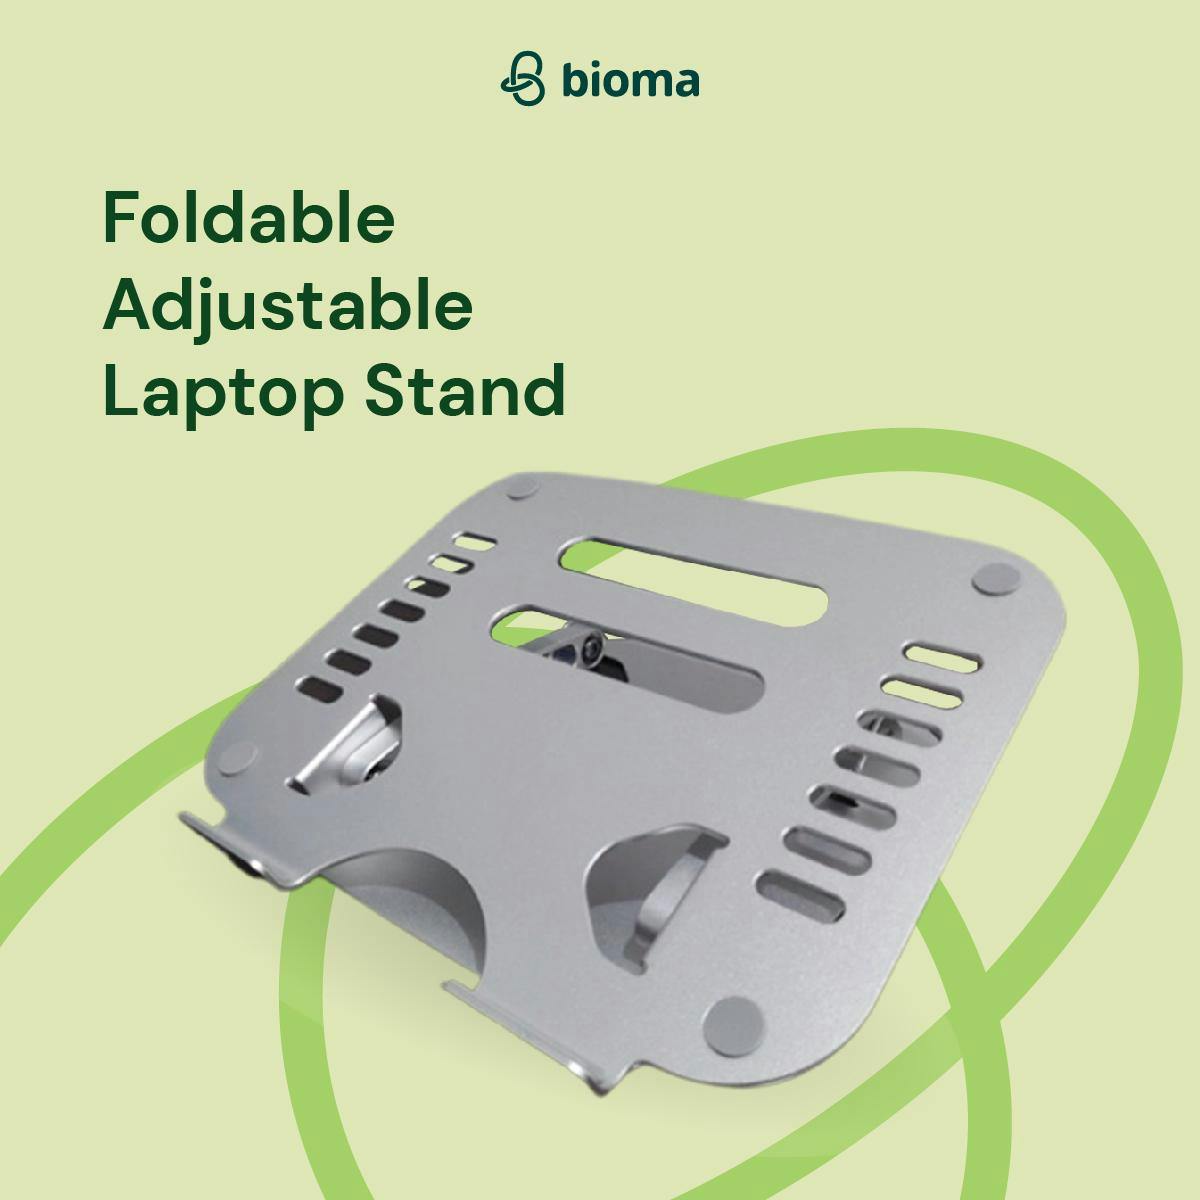 Foldable Adjustable Laptop Stand